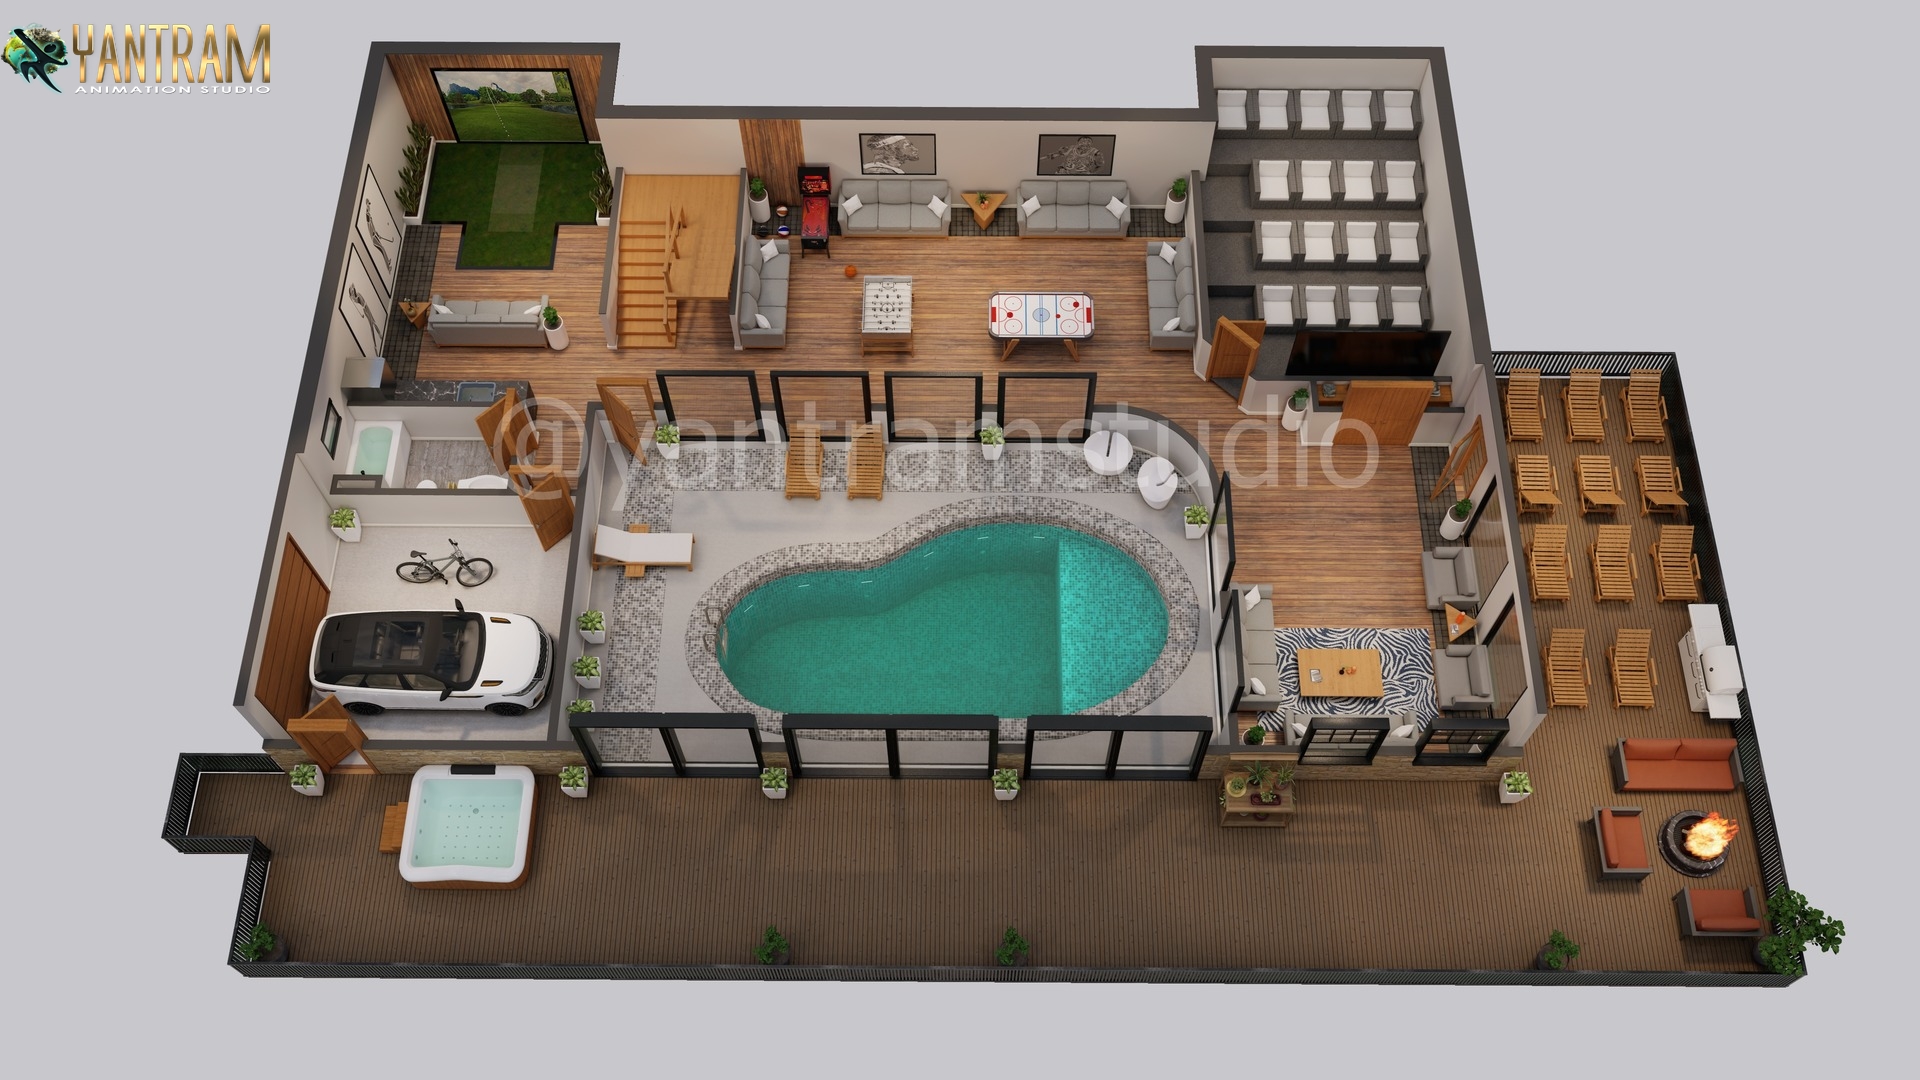 3D Floor Plan Creator Created a Multi-Family House Suitable For Queen Creek, Arizona